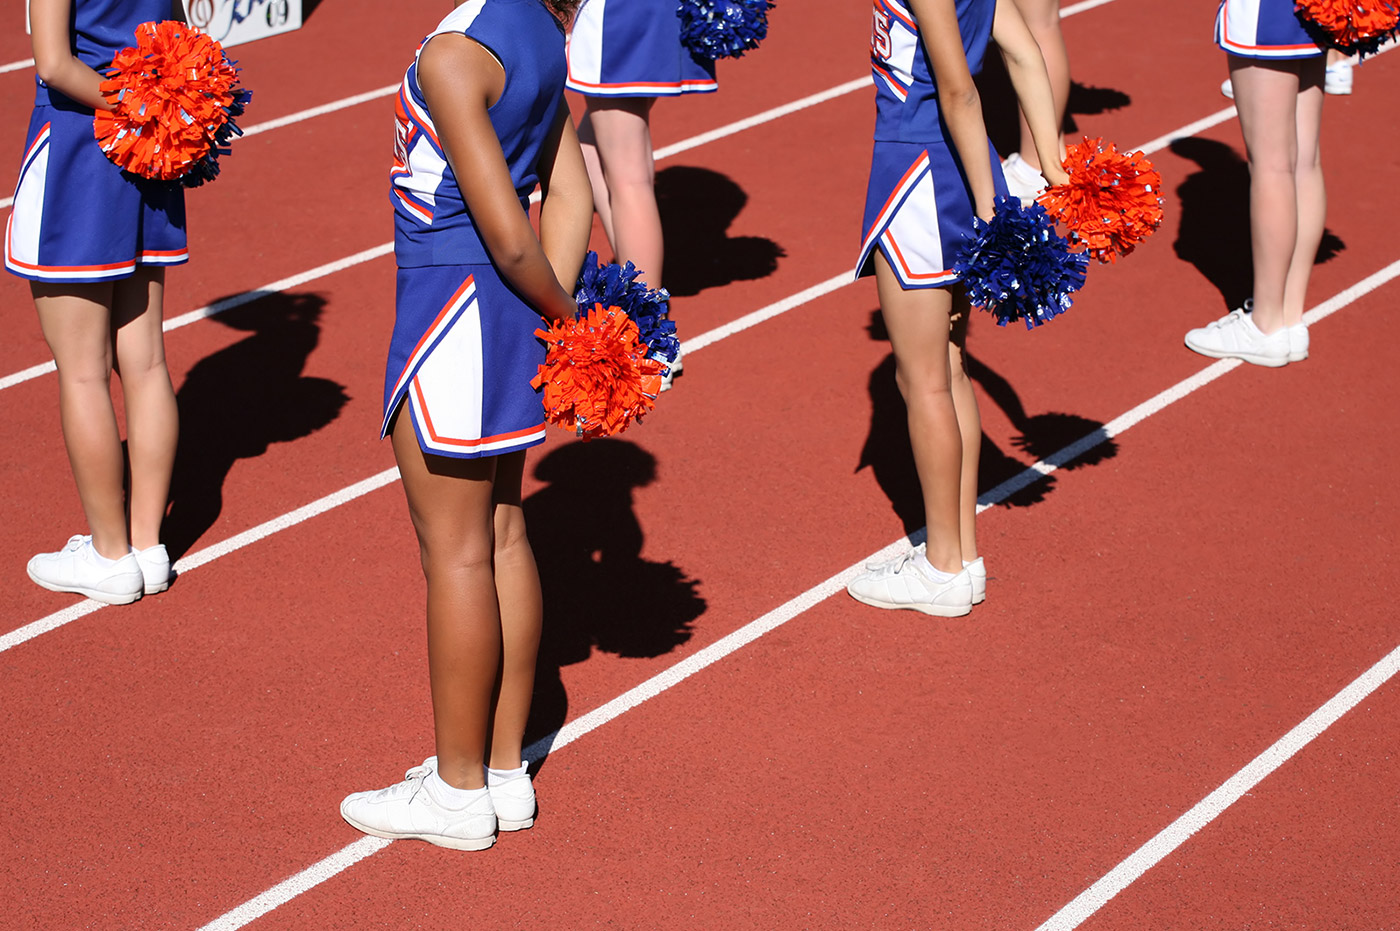 Several cheerleaders standing on a track.